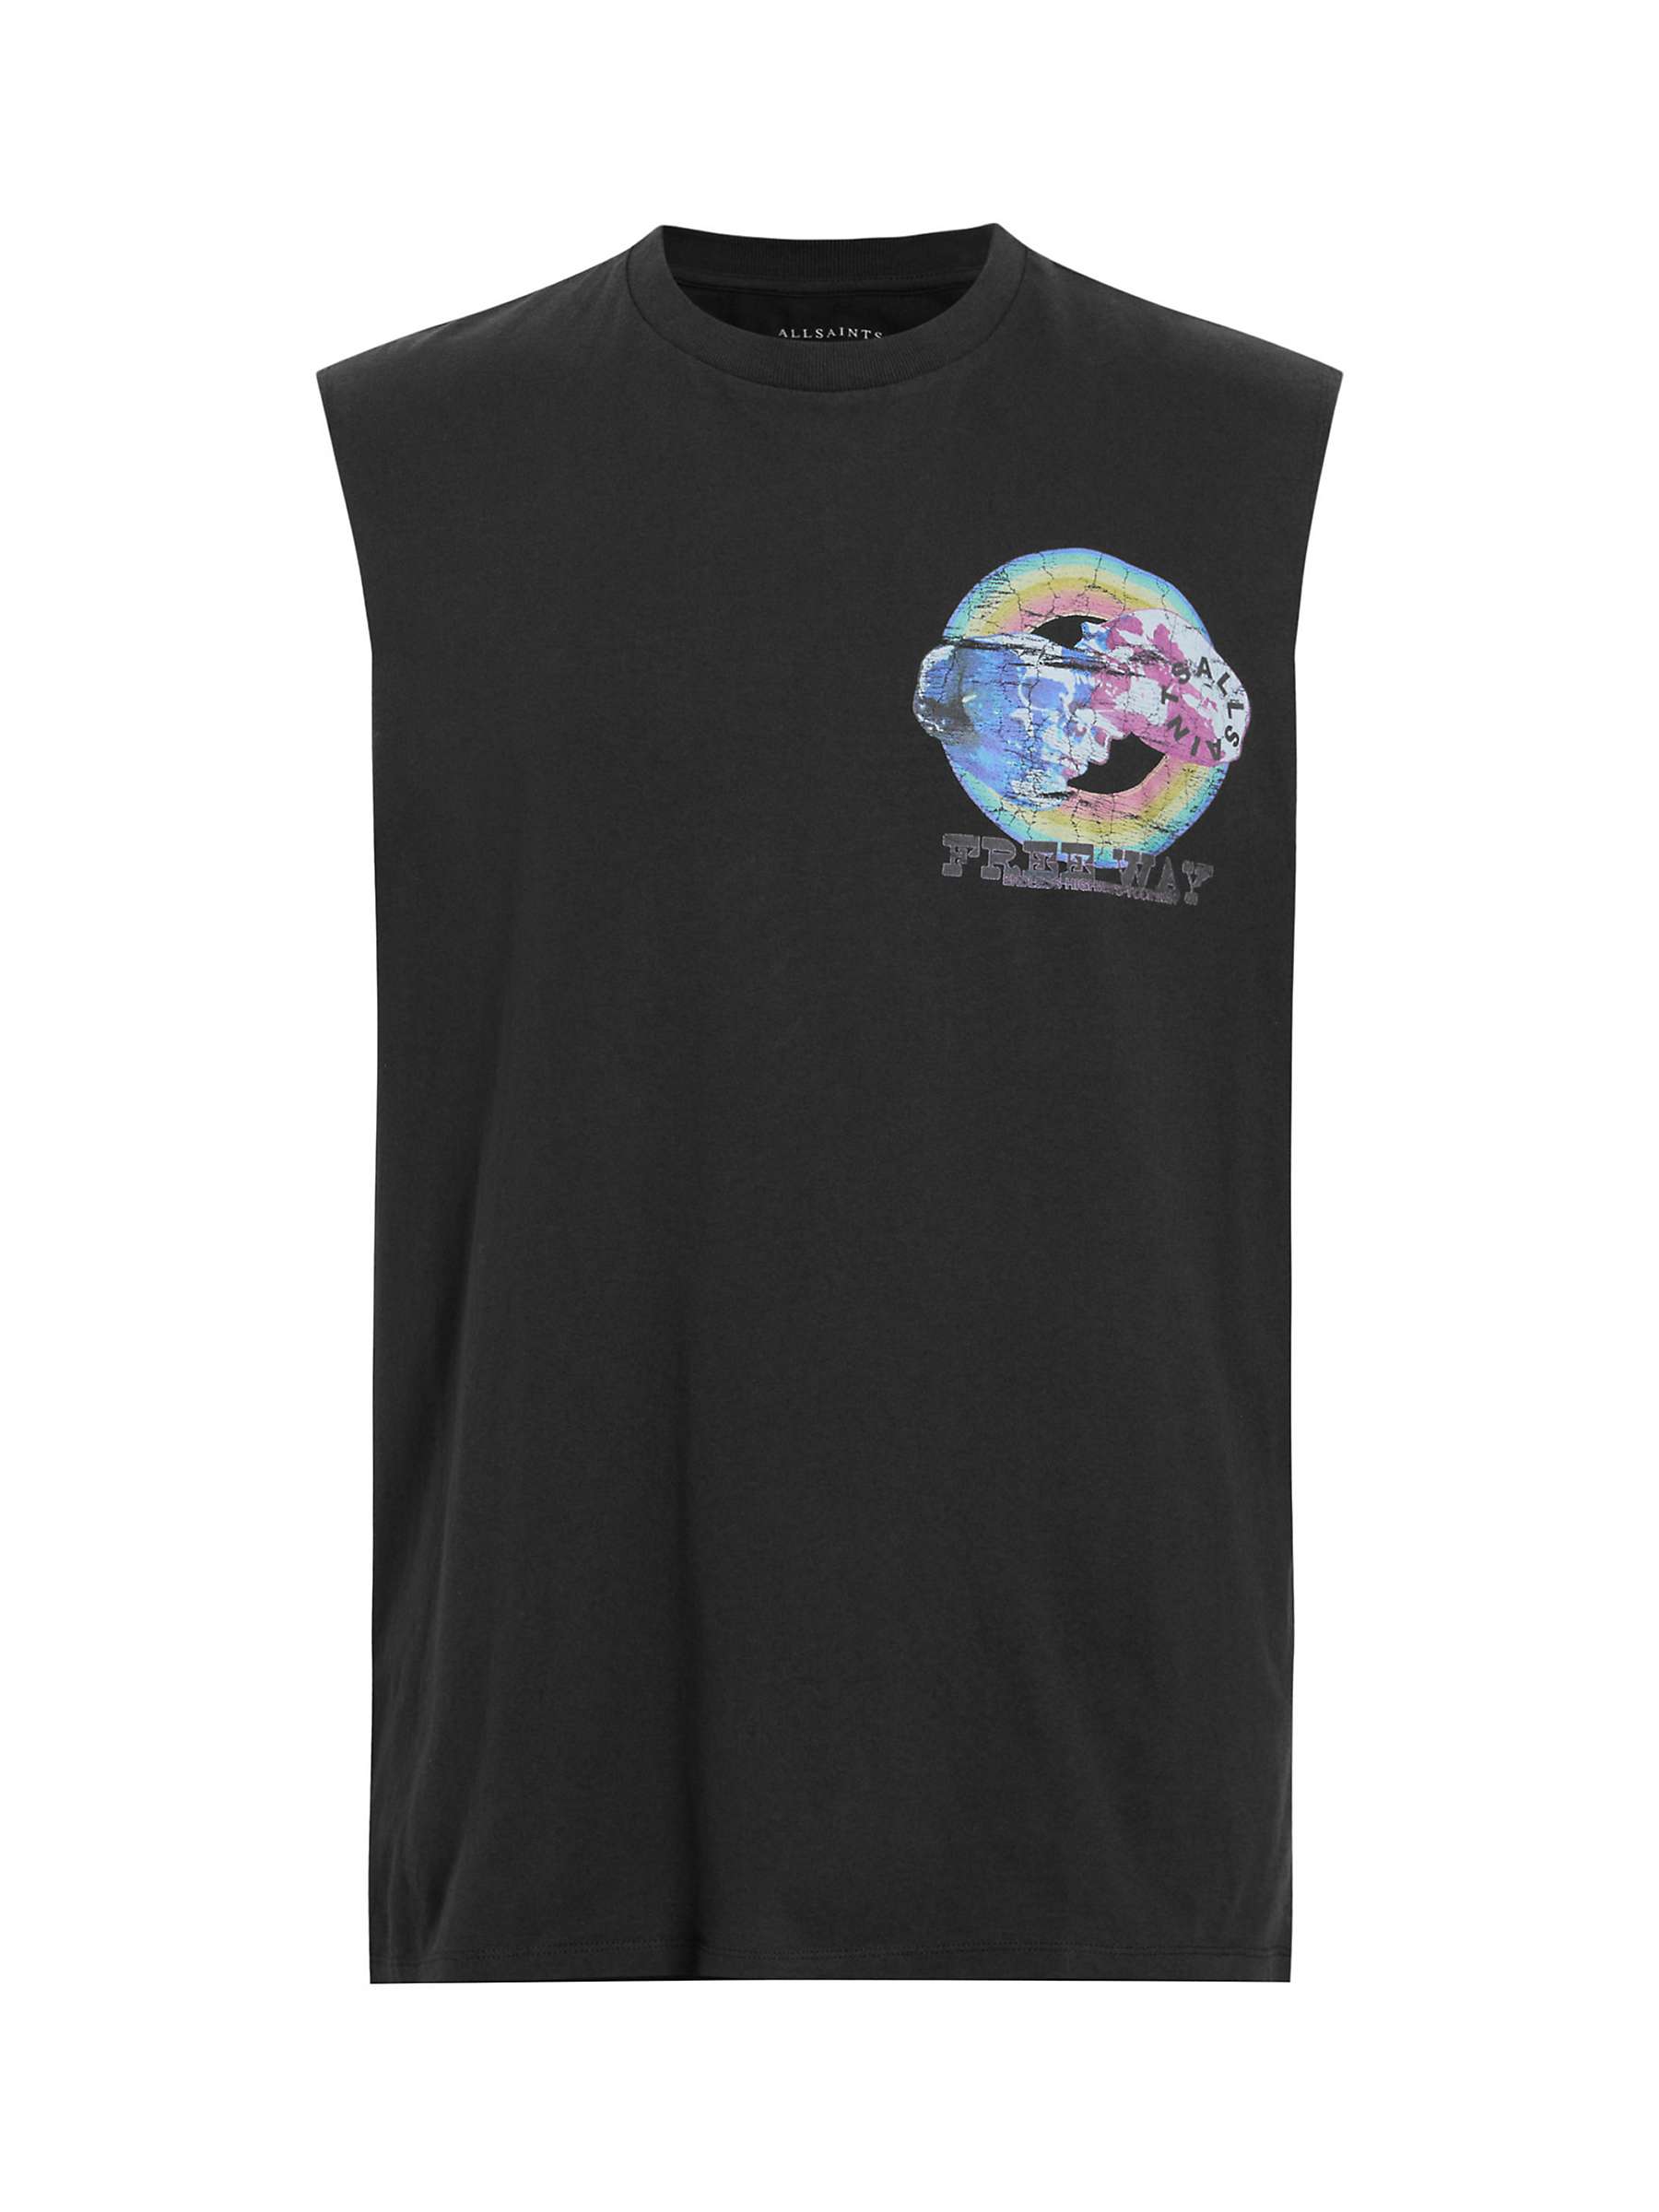 Buy AllSaints Cheech Sleeves Crew Top, Washed Black Online at johnlewis.com